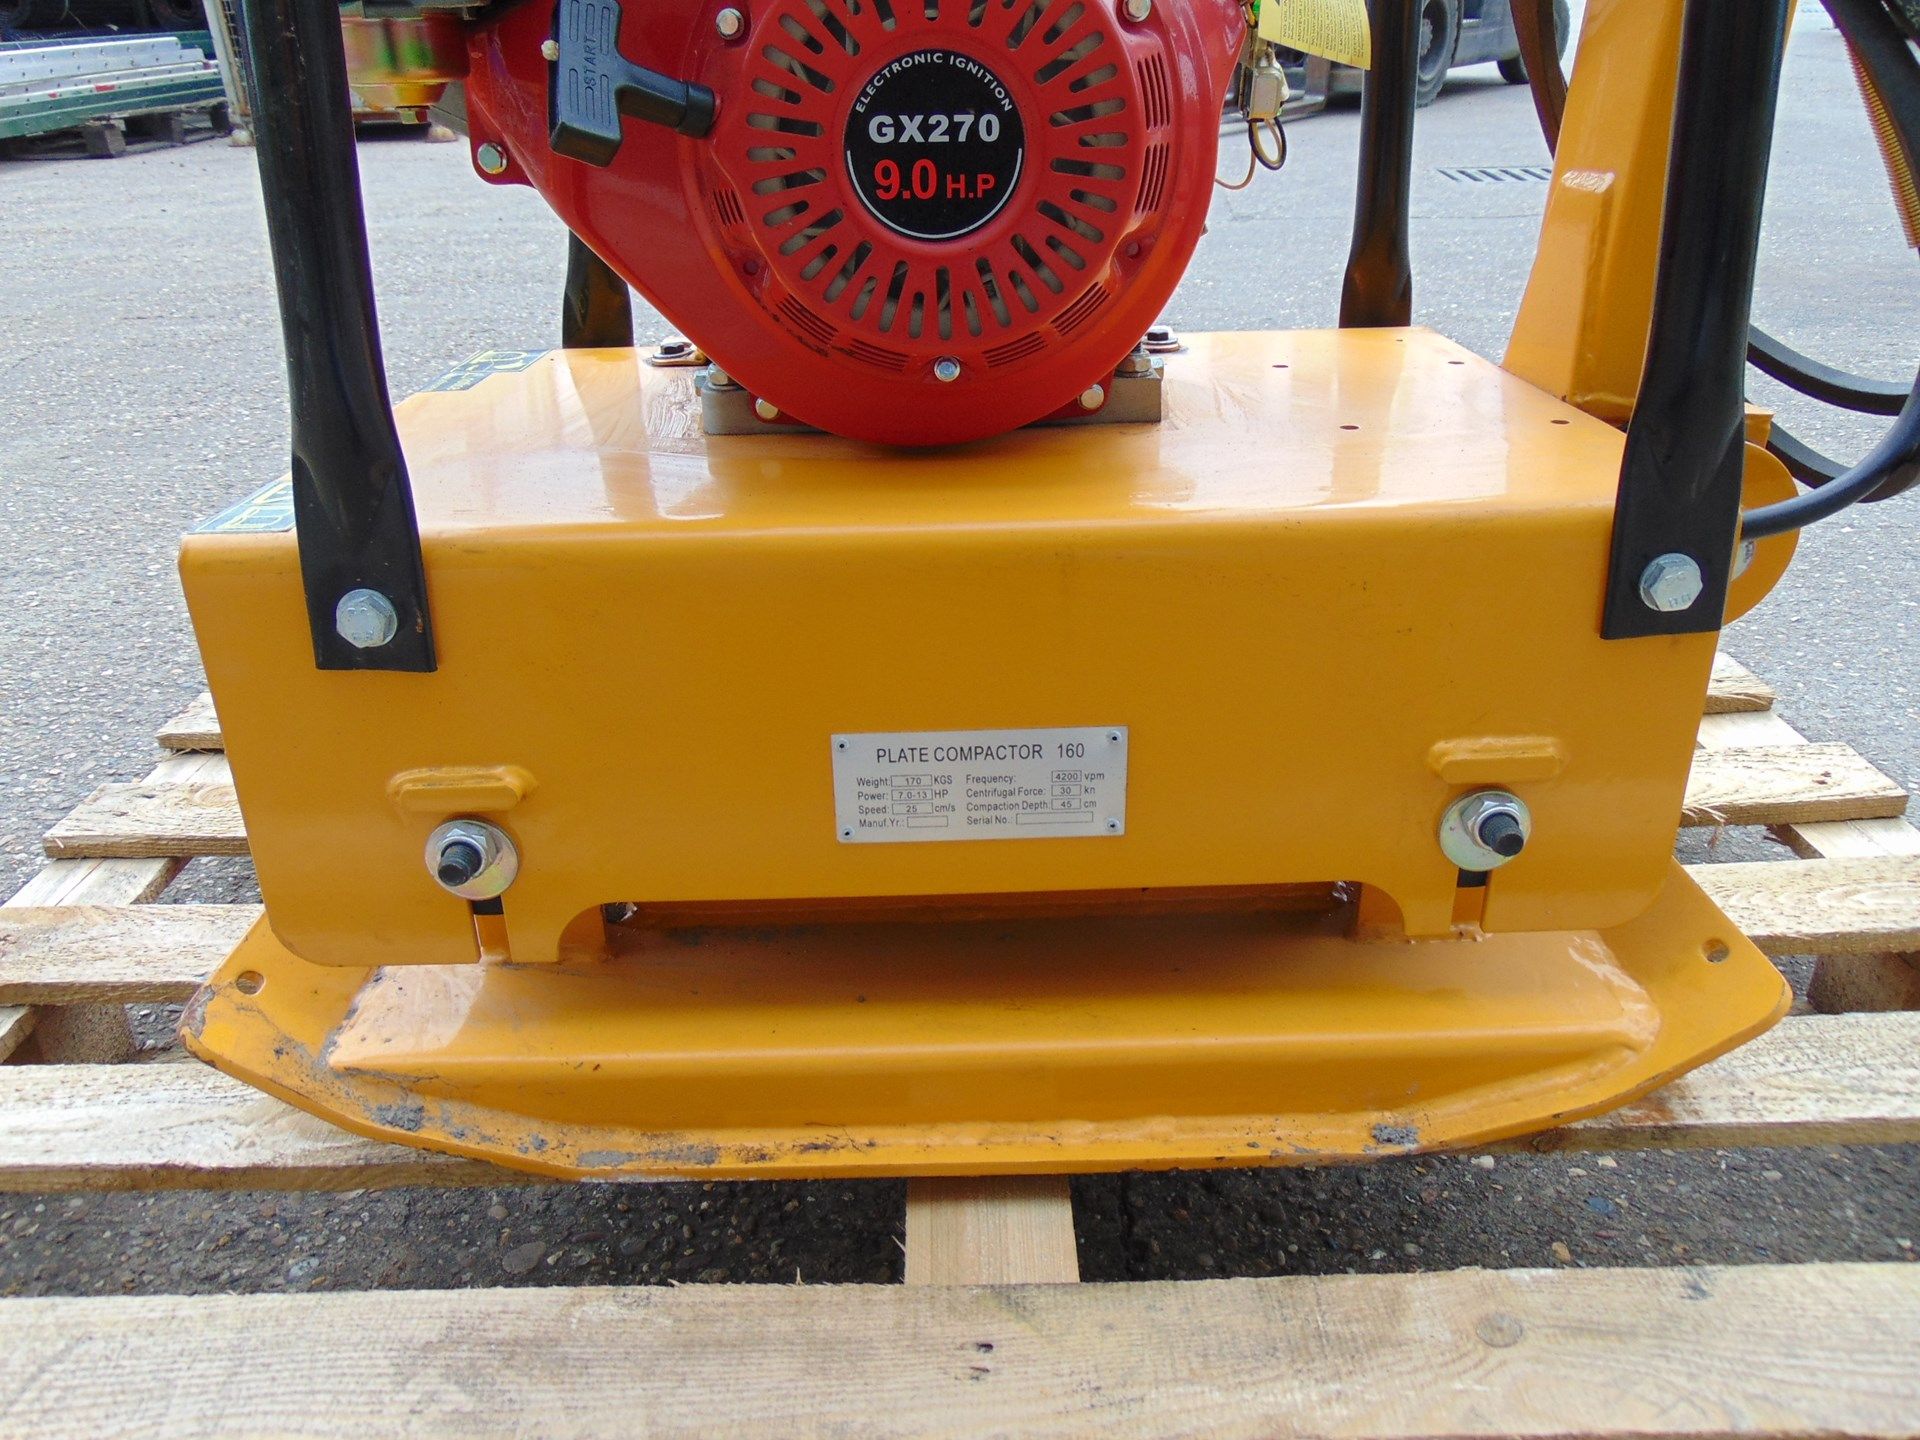 New & Unused SNK Power C160 Petrol Powered Compaction Wacker Plate - Image 8 of 11